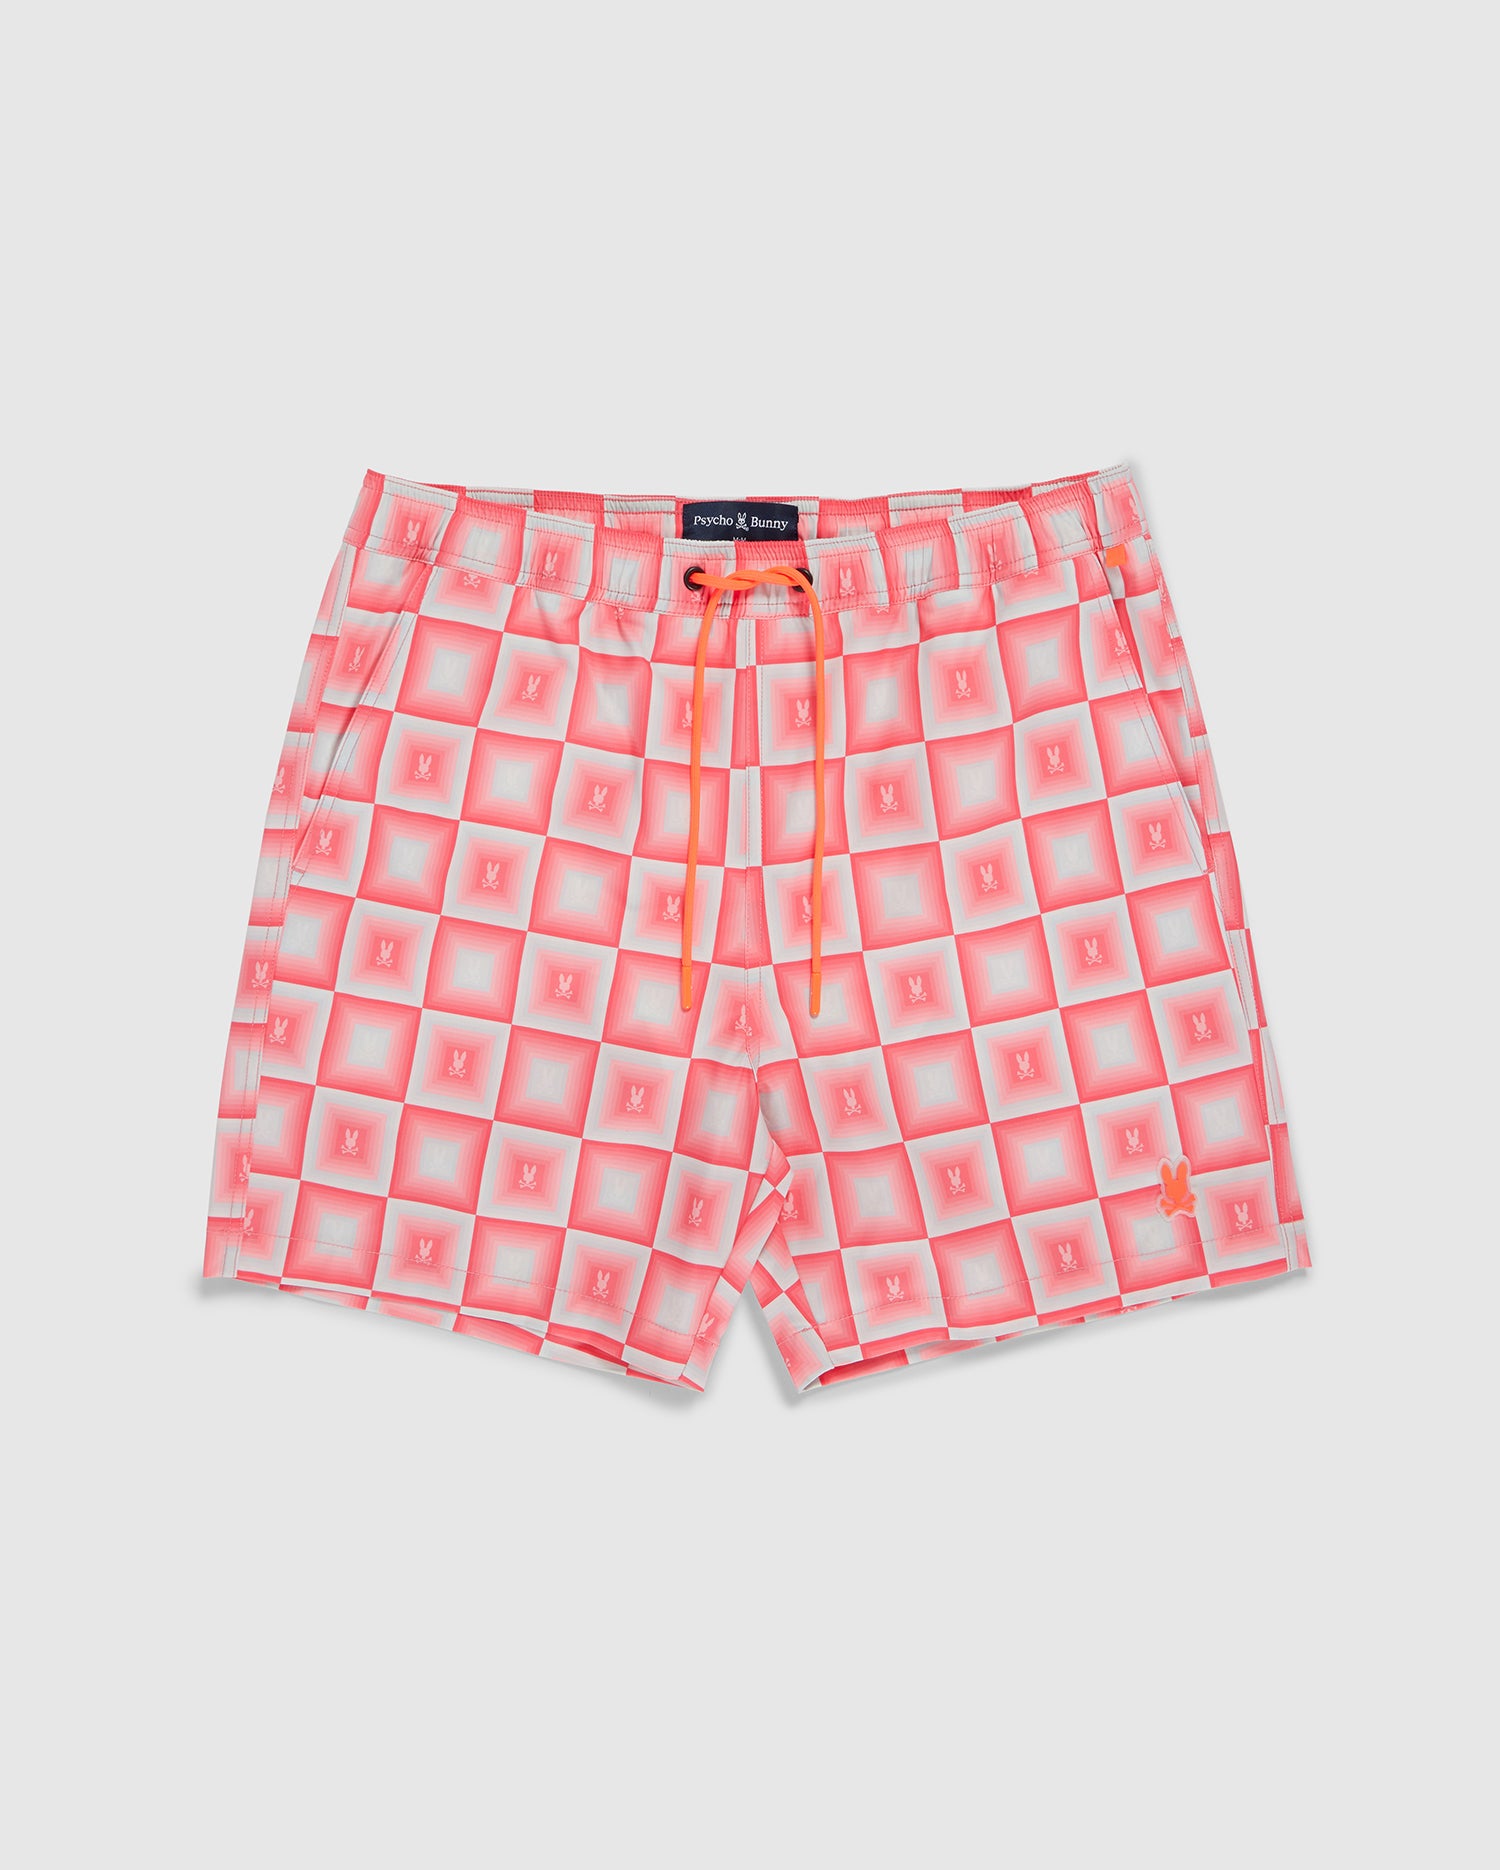 Pink Psycho Bunny UTICA swim trunks featuring a grid pattern of small flamingo graphics, displayed flat on a white background.